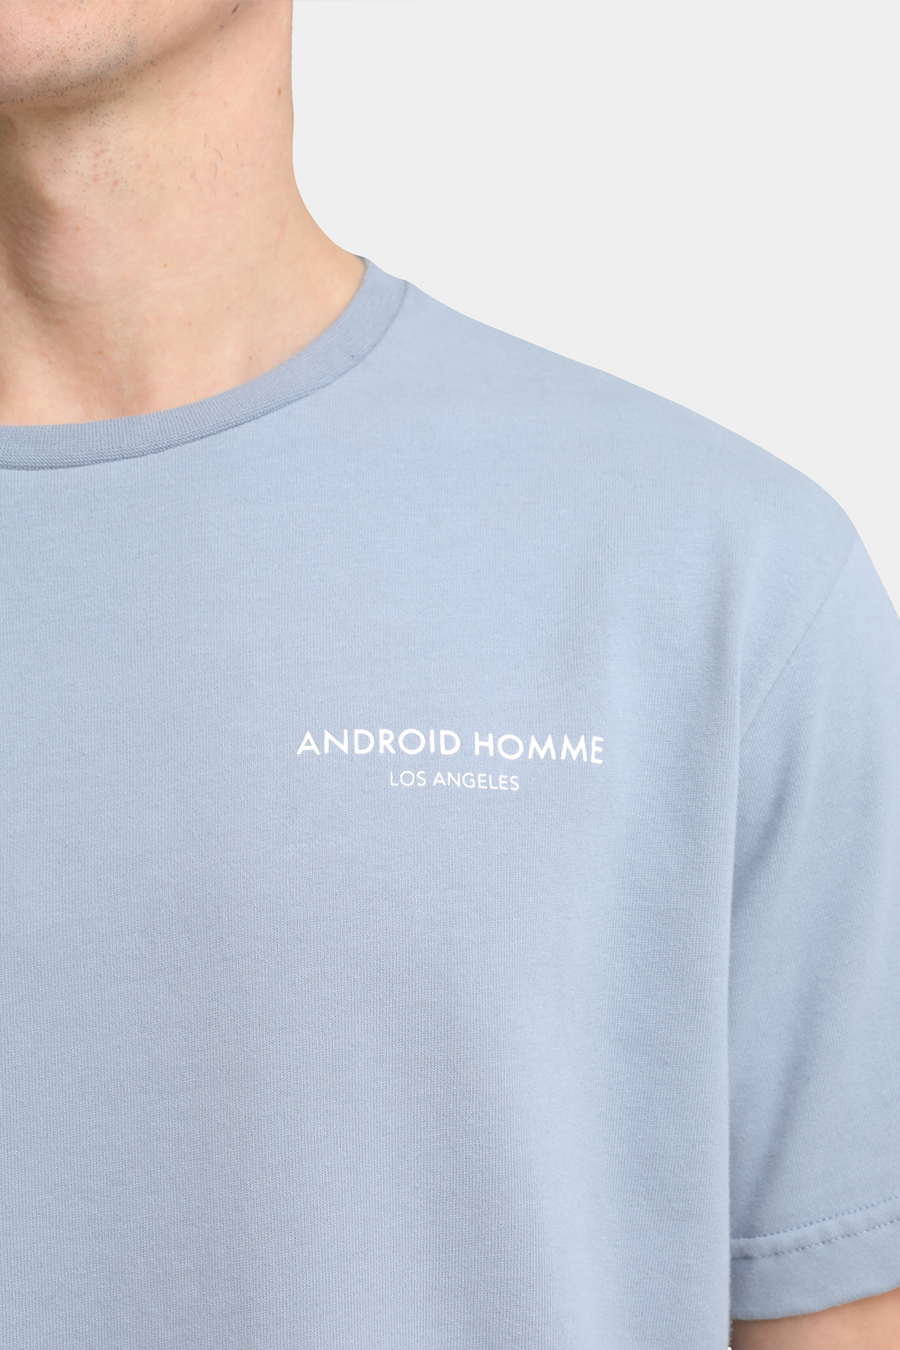 Buy the Android Homme Run Division T-Shirt in Grey at Intro. Spend £50 for free UK delivery. Official stockists. We ship worldwide.